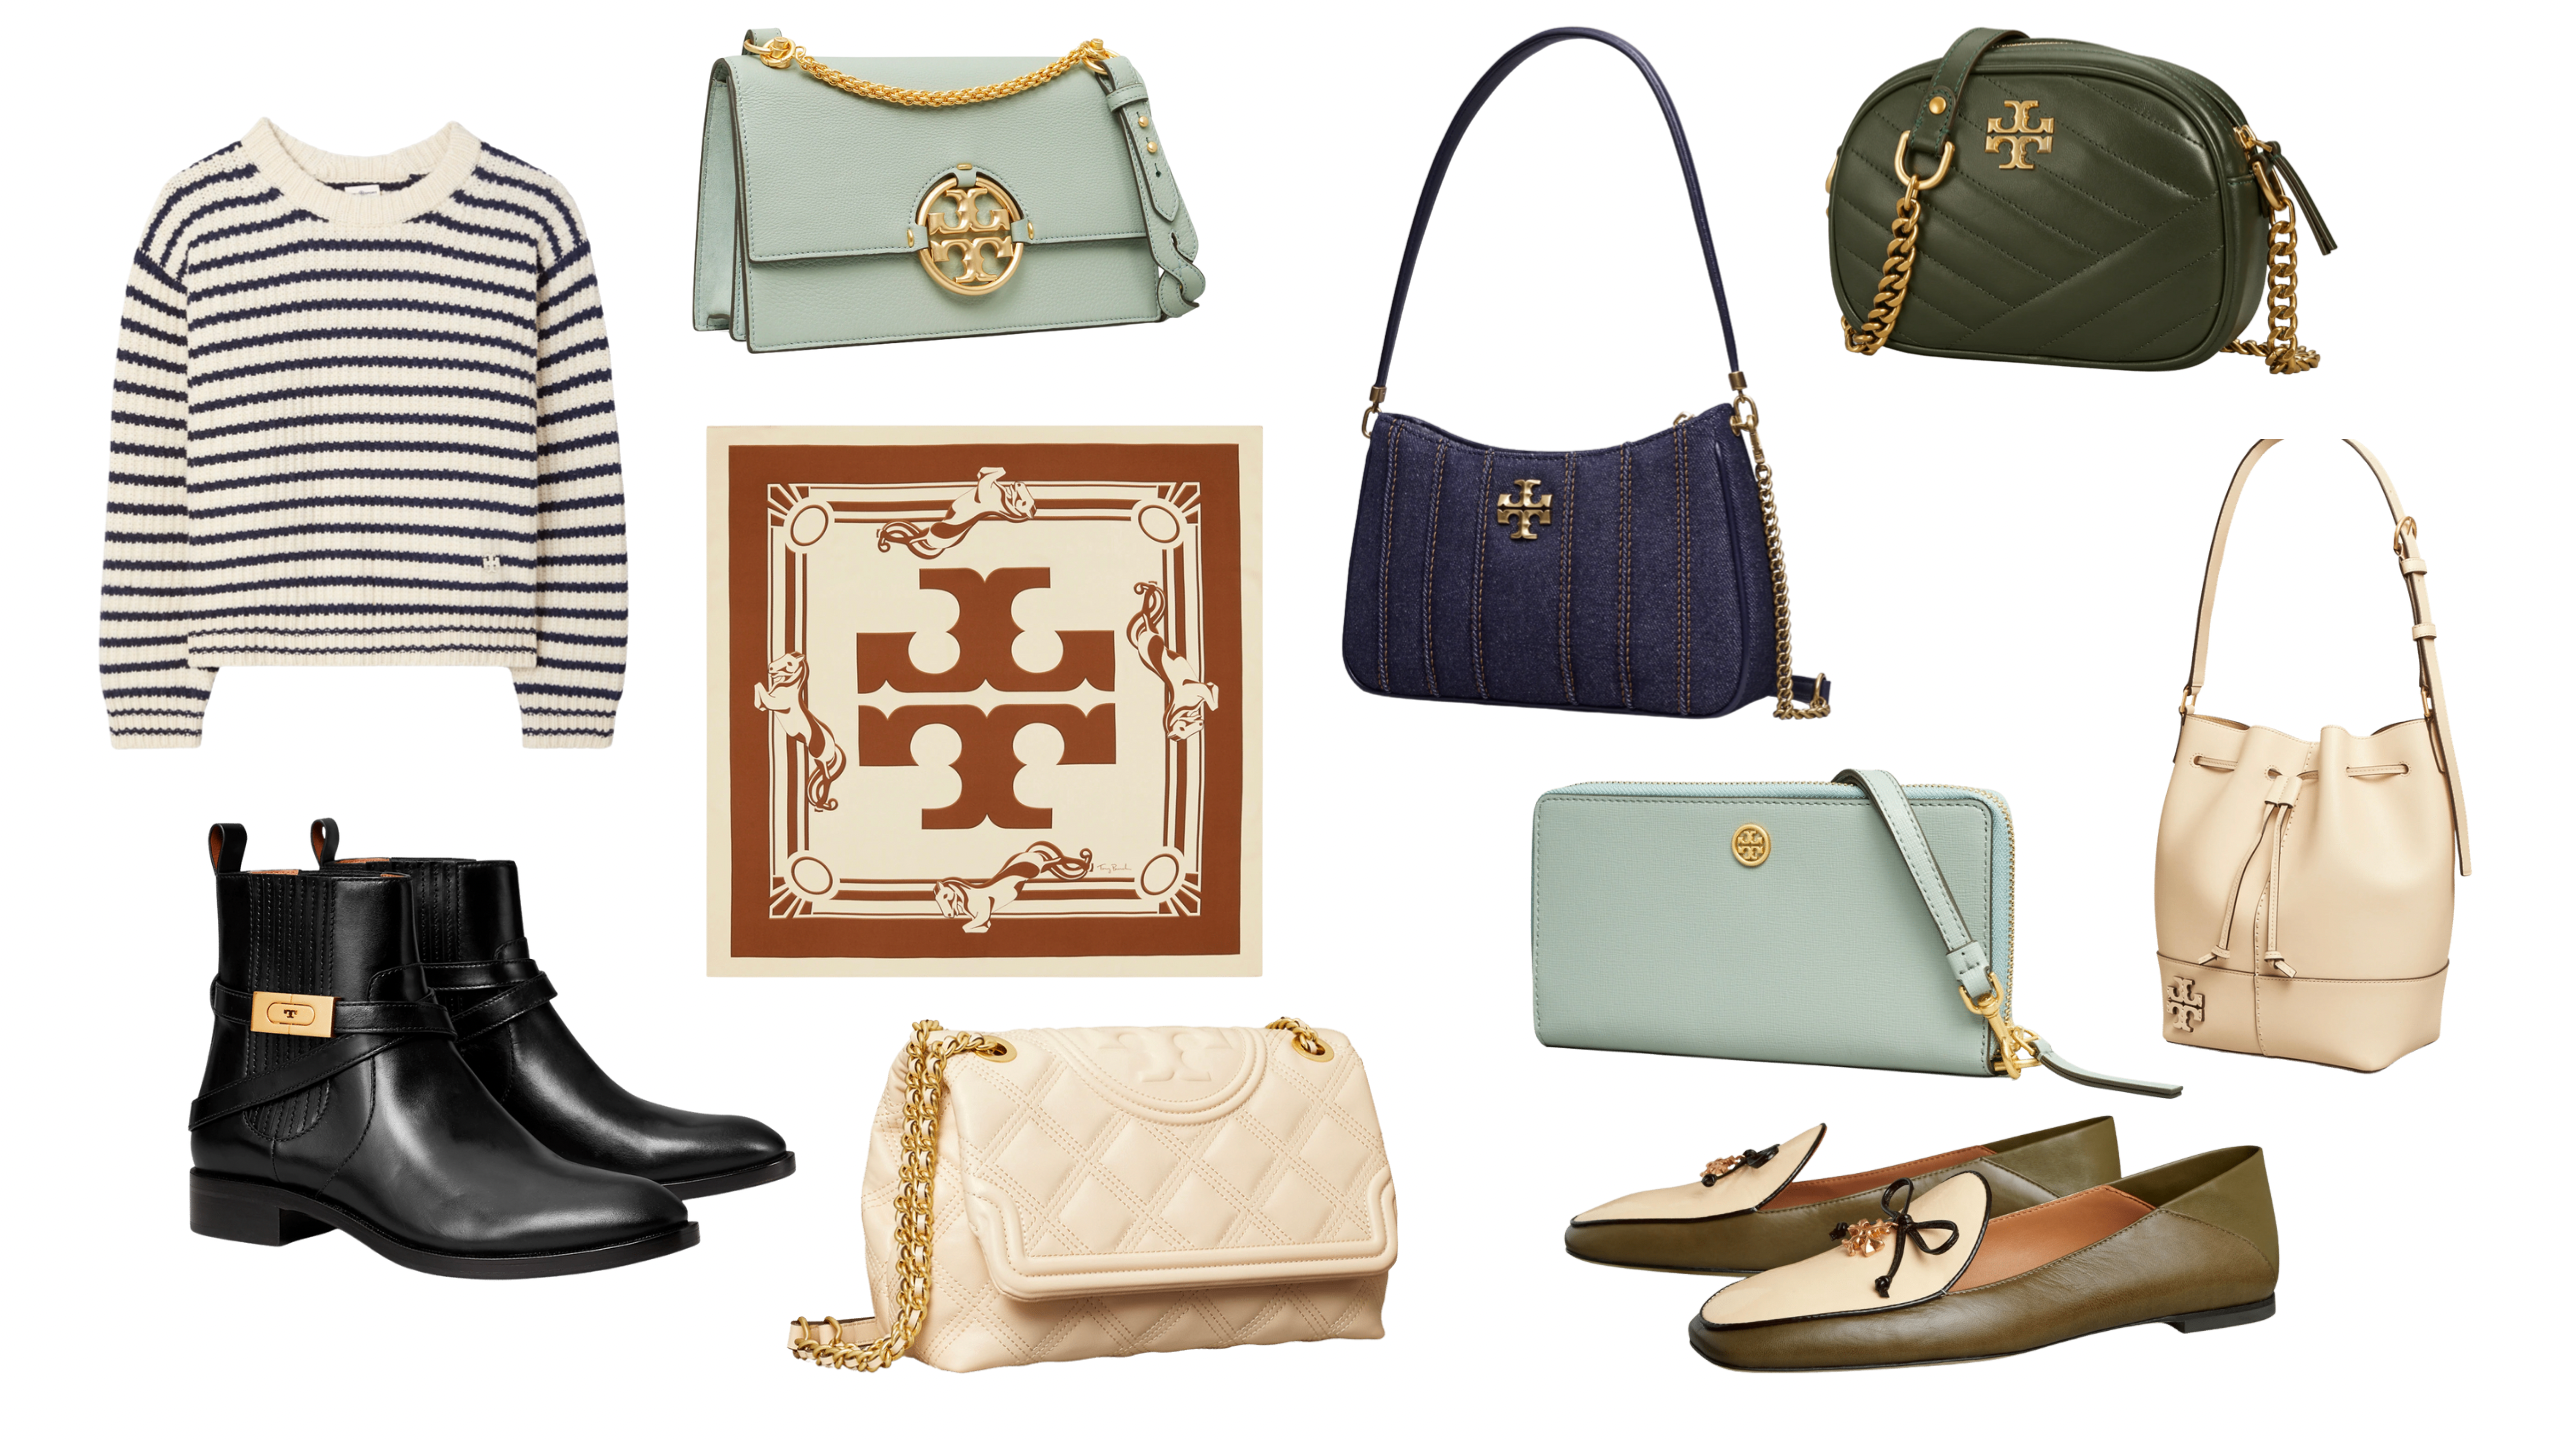 Photos of Tory Burch sale items like clothes, handbags, and shoes.